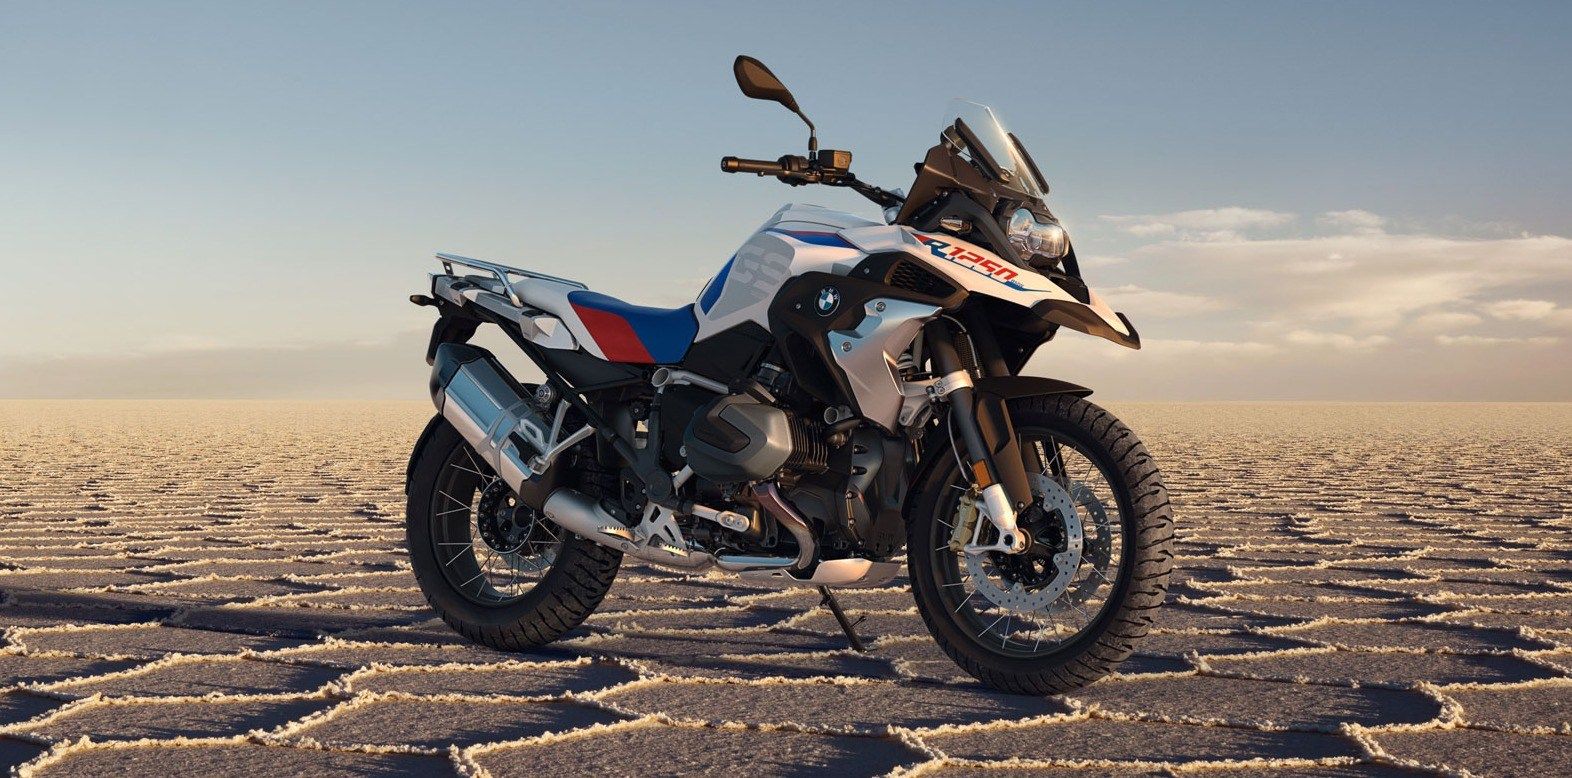 BMW has minor changes for R1250 GS, G310 GS for 2021 Moto Guide